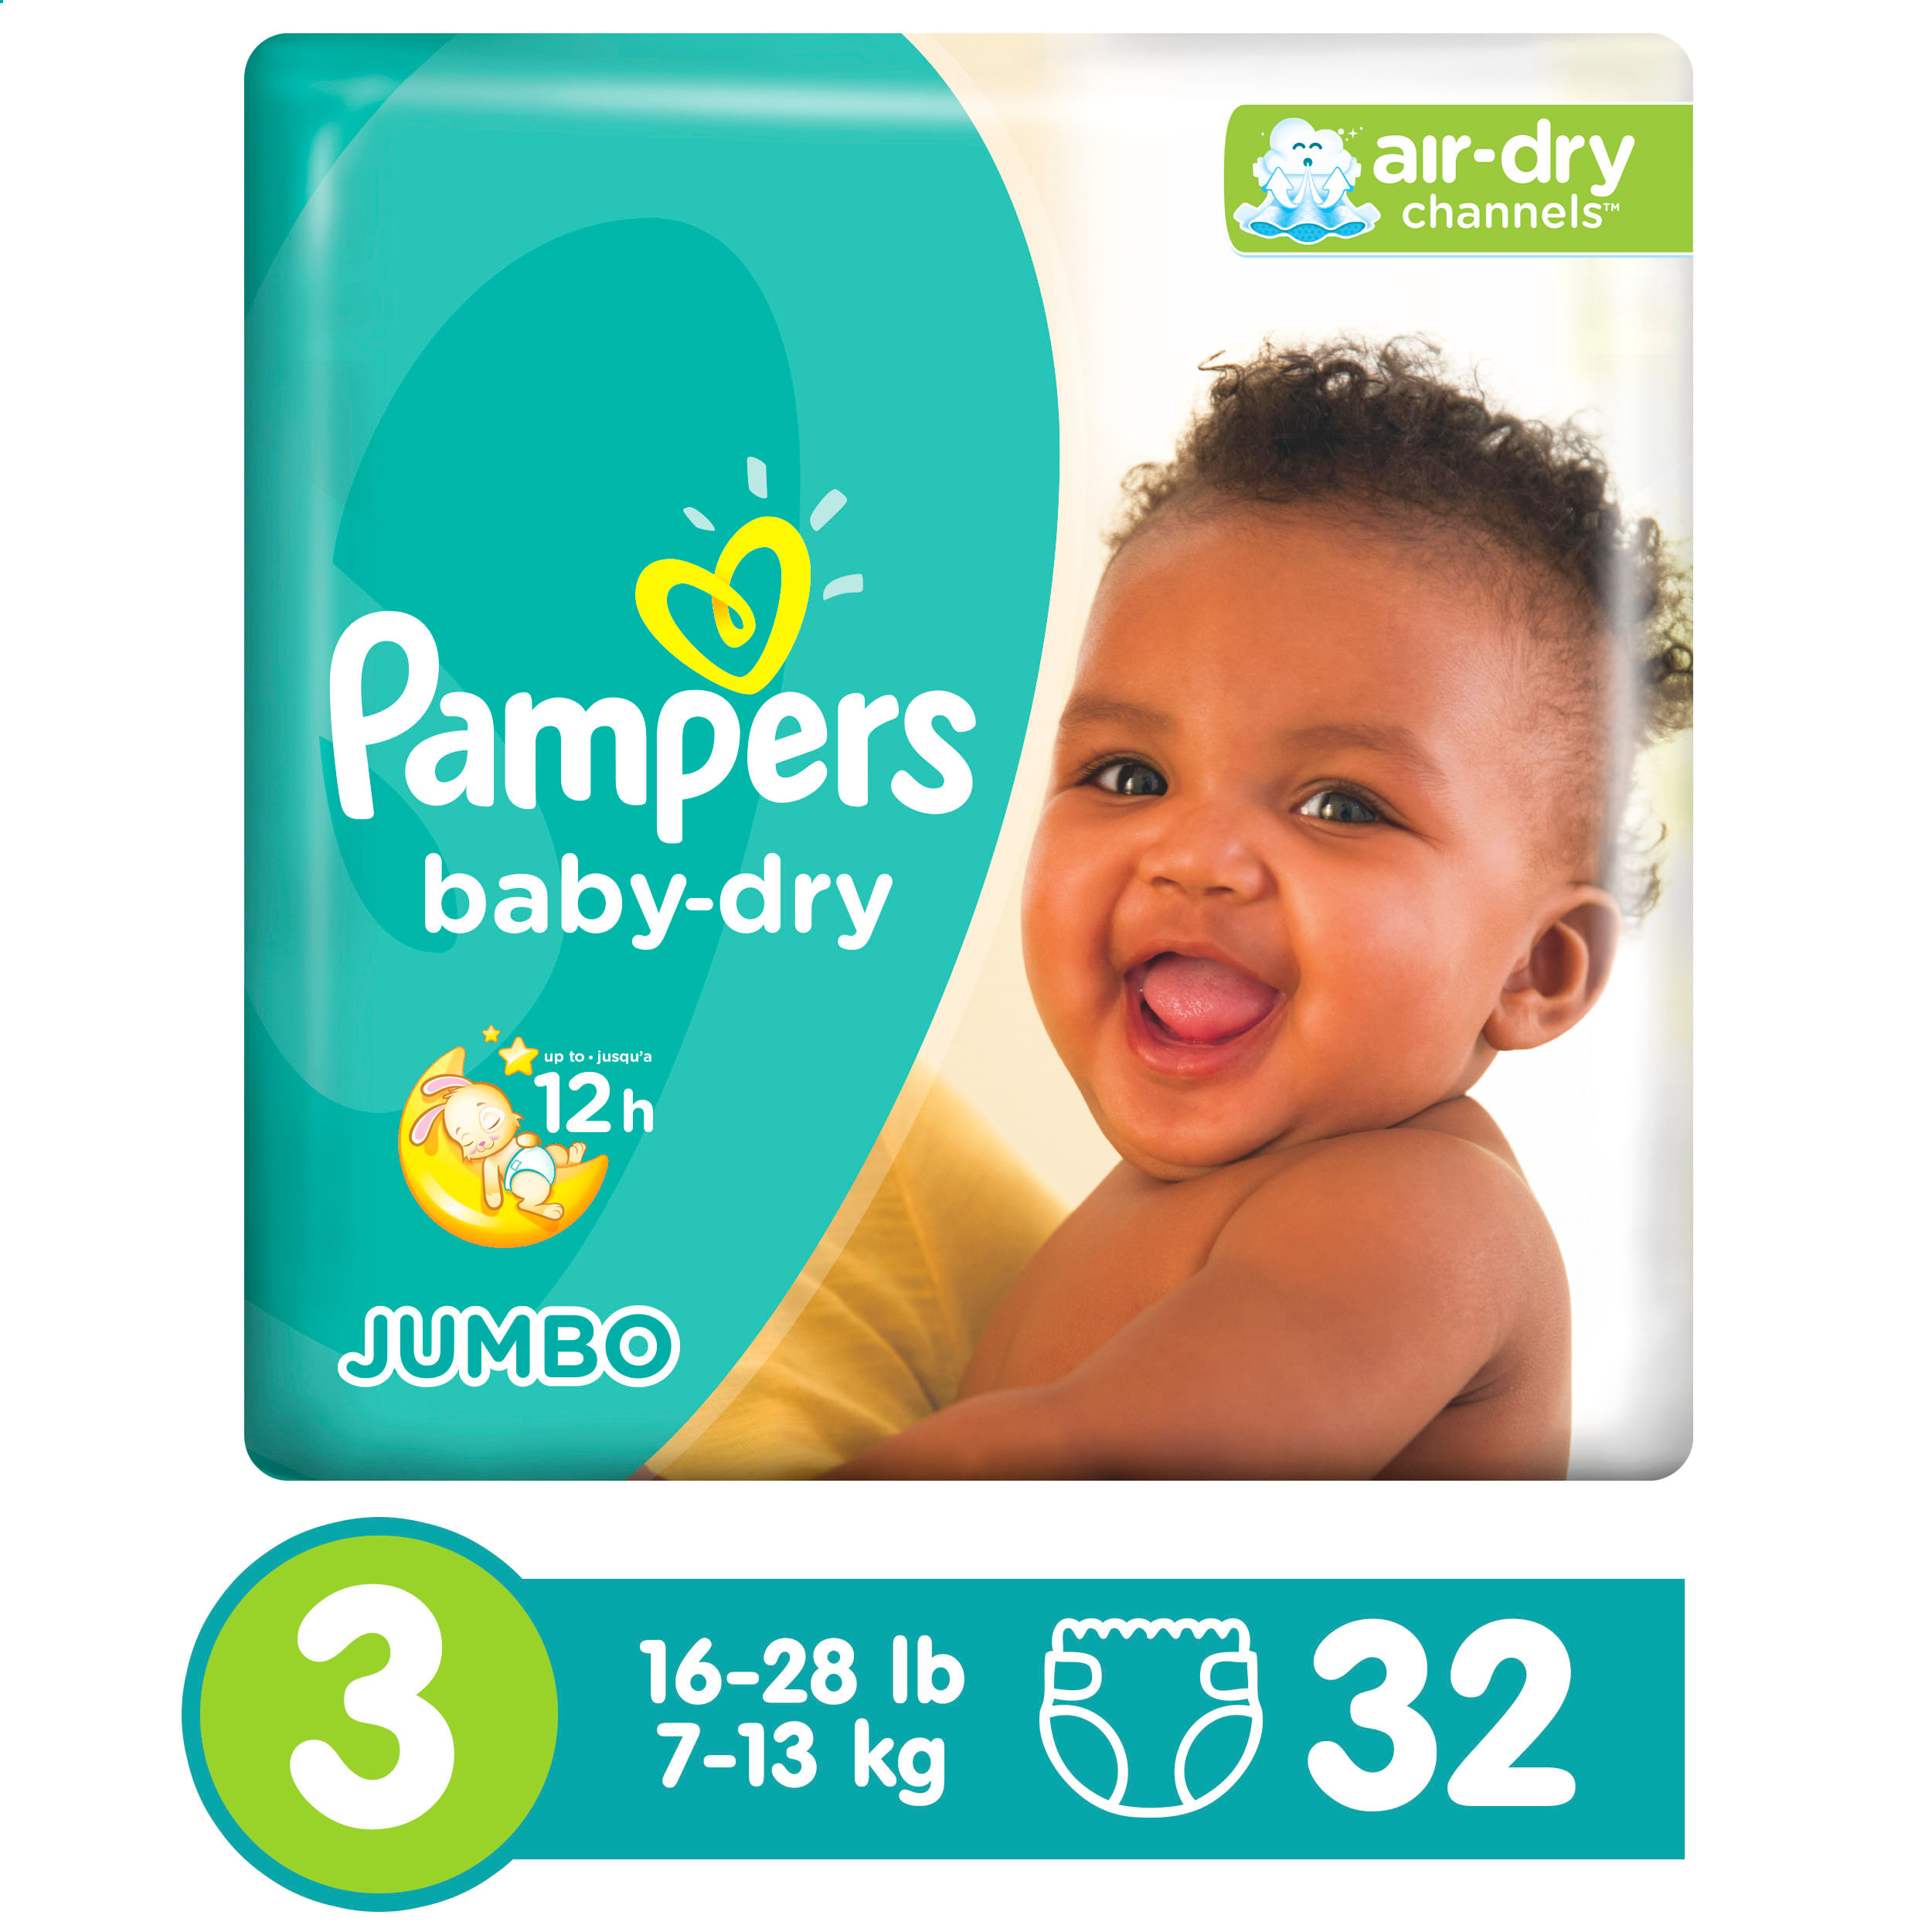  Pampers Pañales Swaddlers, talla 2, 32 unidades : Bebés